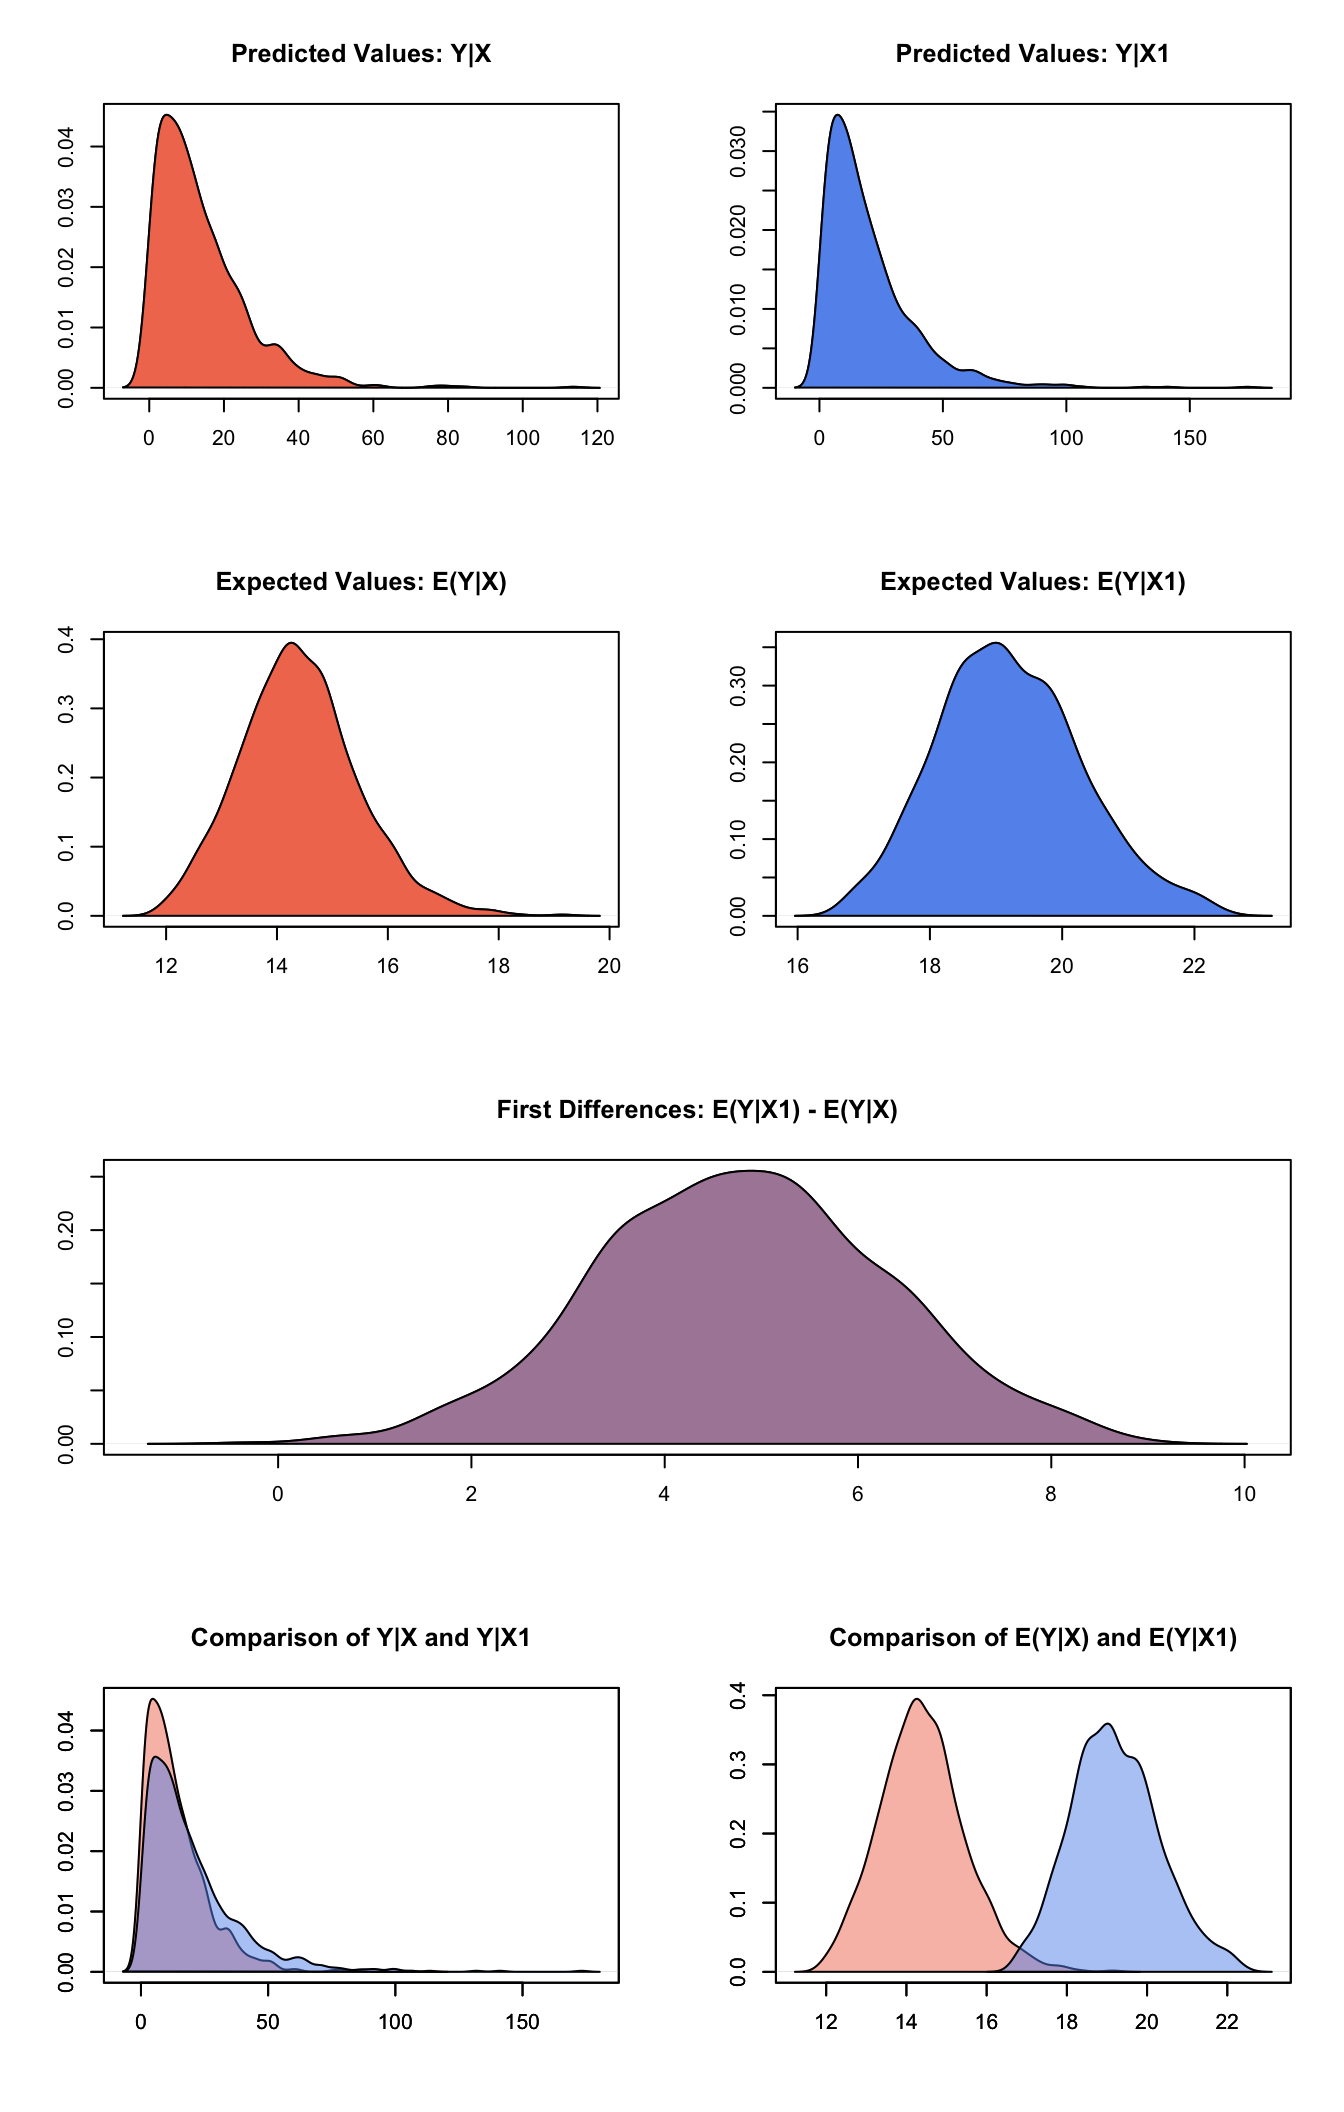 Graphs of Quantities of Interest for Zelig-gamma